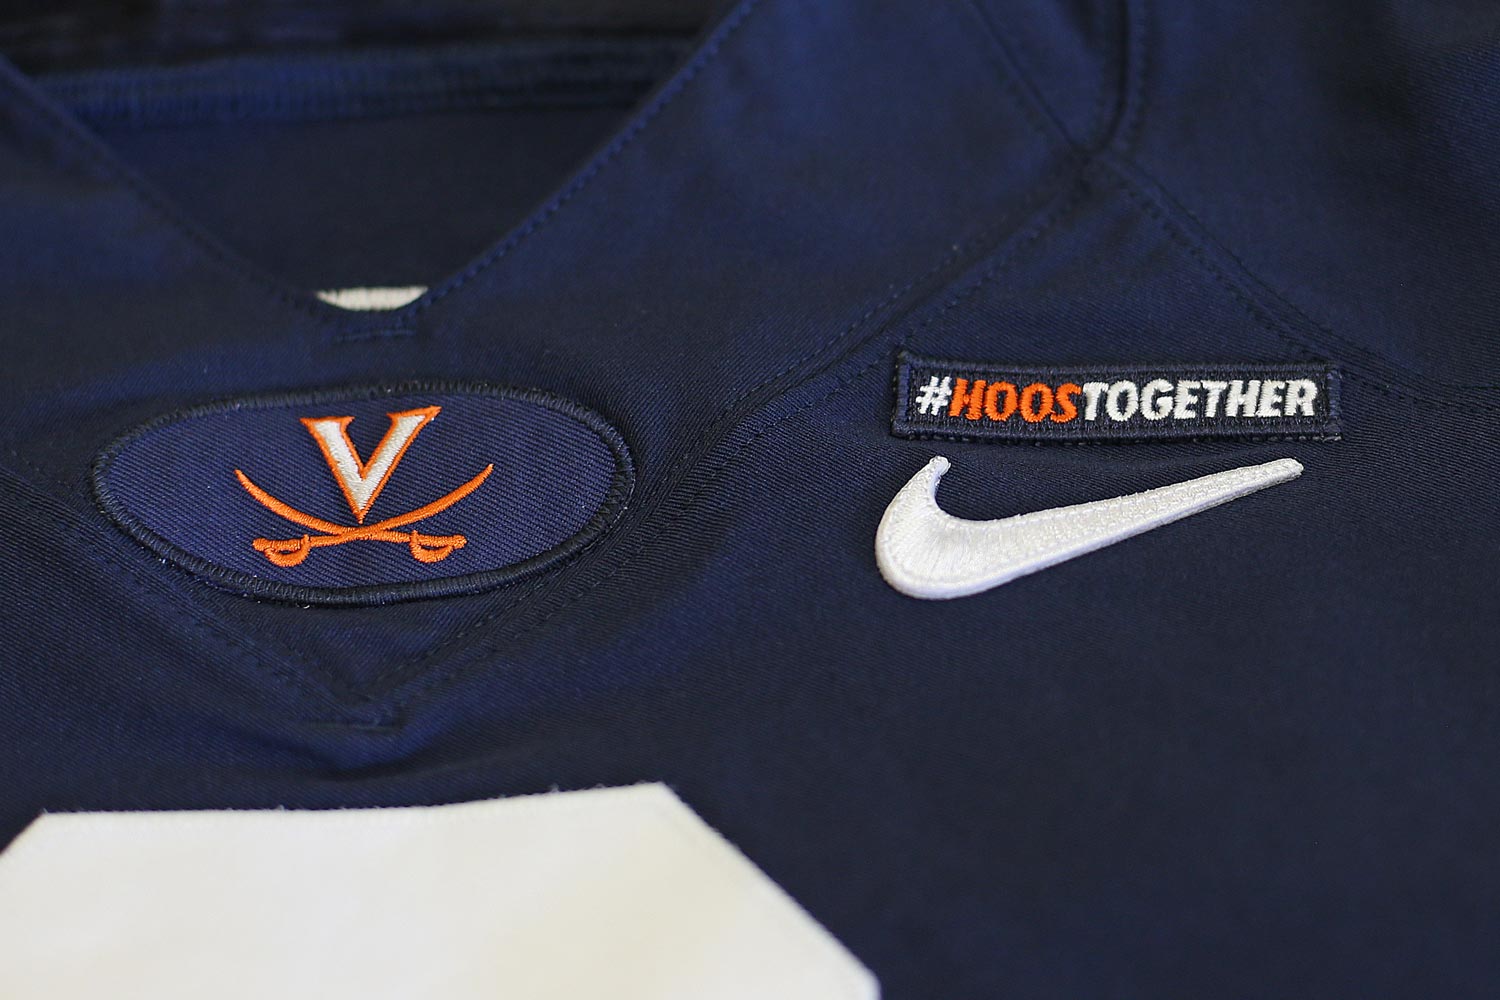 UVA athletic uniform with an up close view of the Virginia V saber and a patch that says #hoosTogether